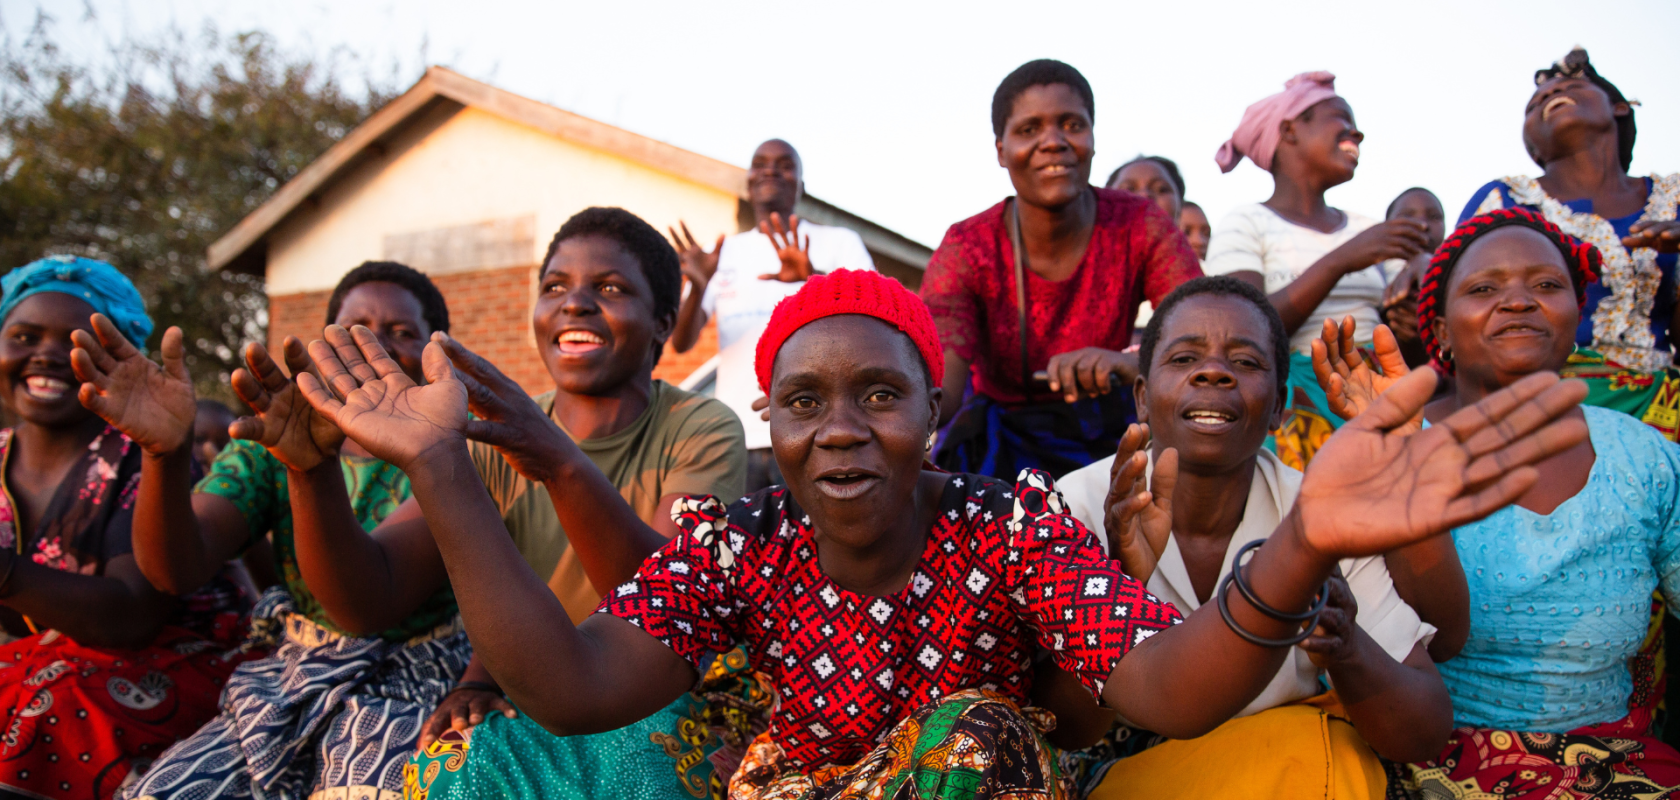 Women from the Chilima Mgwilizano Mayi Walas group in Malawi are dancing and celebrating together.